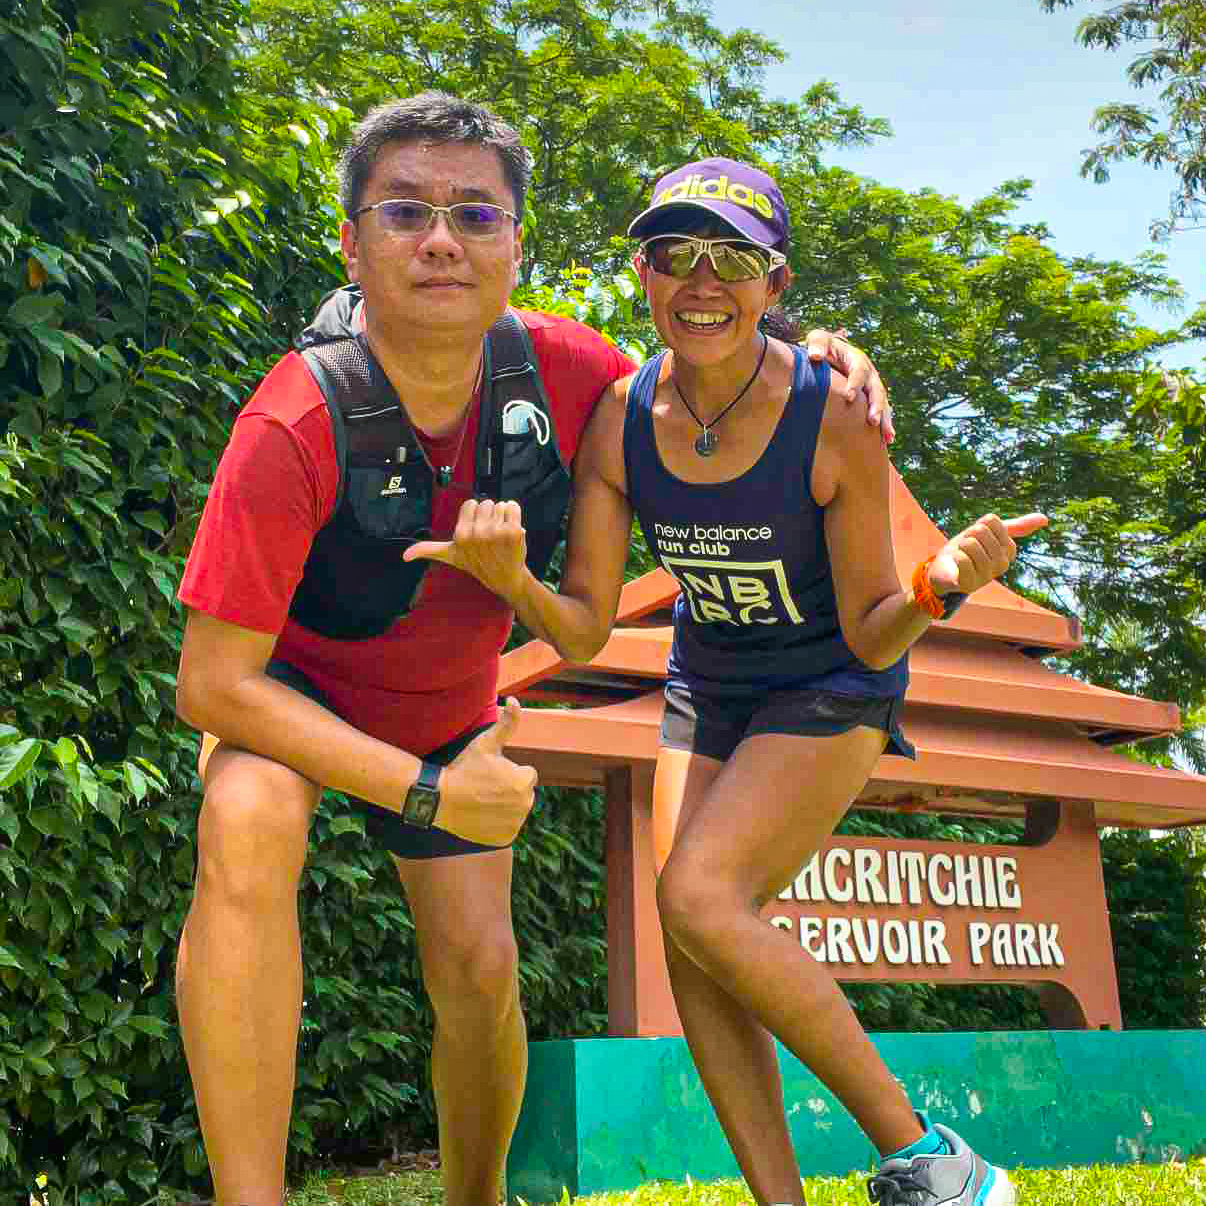 This image features a husband and wife posing in front of Macritchie Reservoir's signage before they embark on a hike. They are both showing the thumbs-up sign.